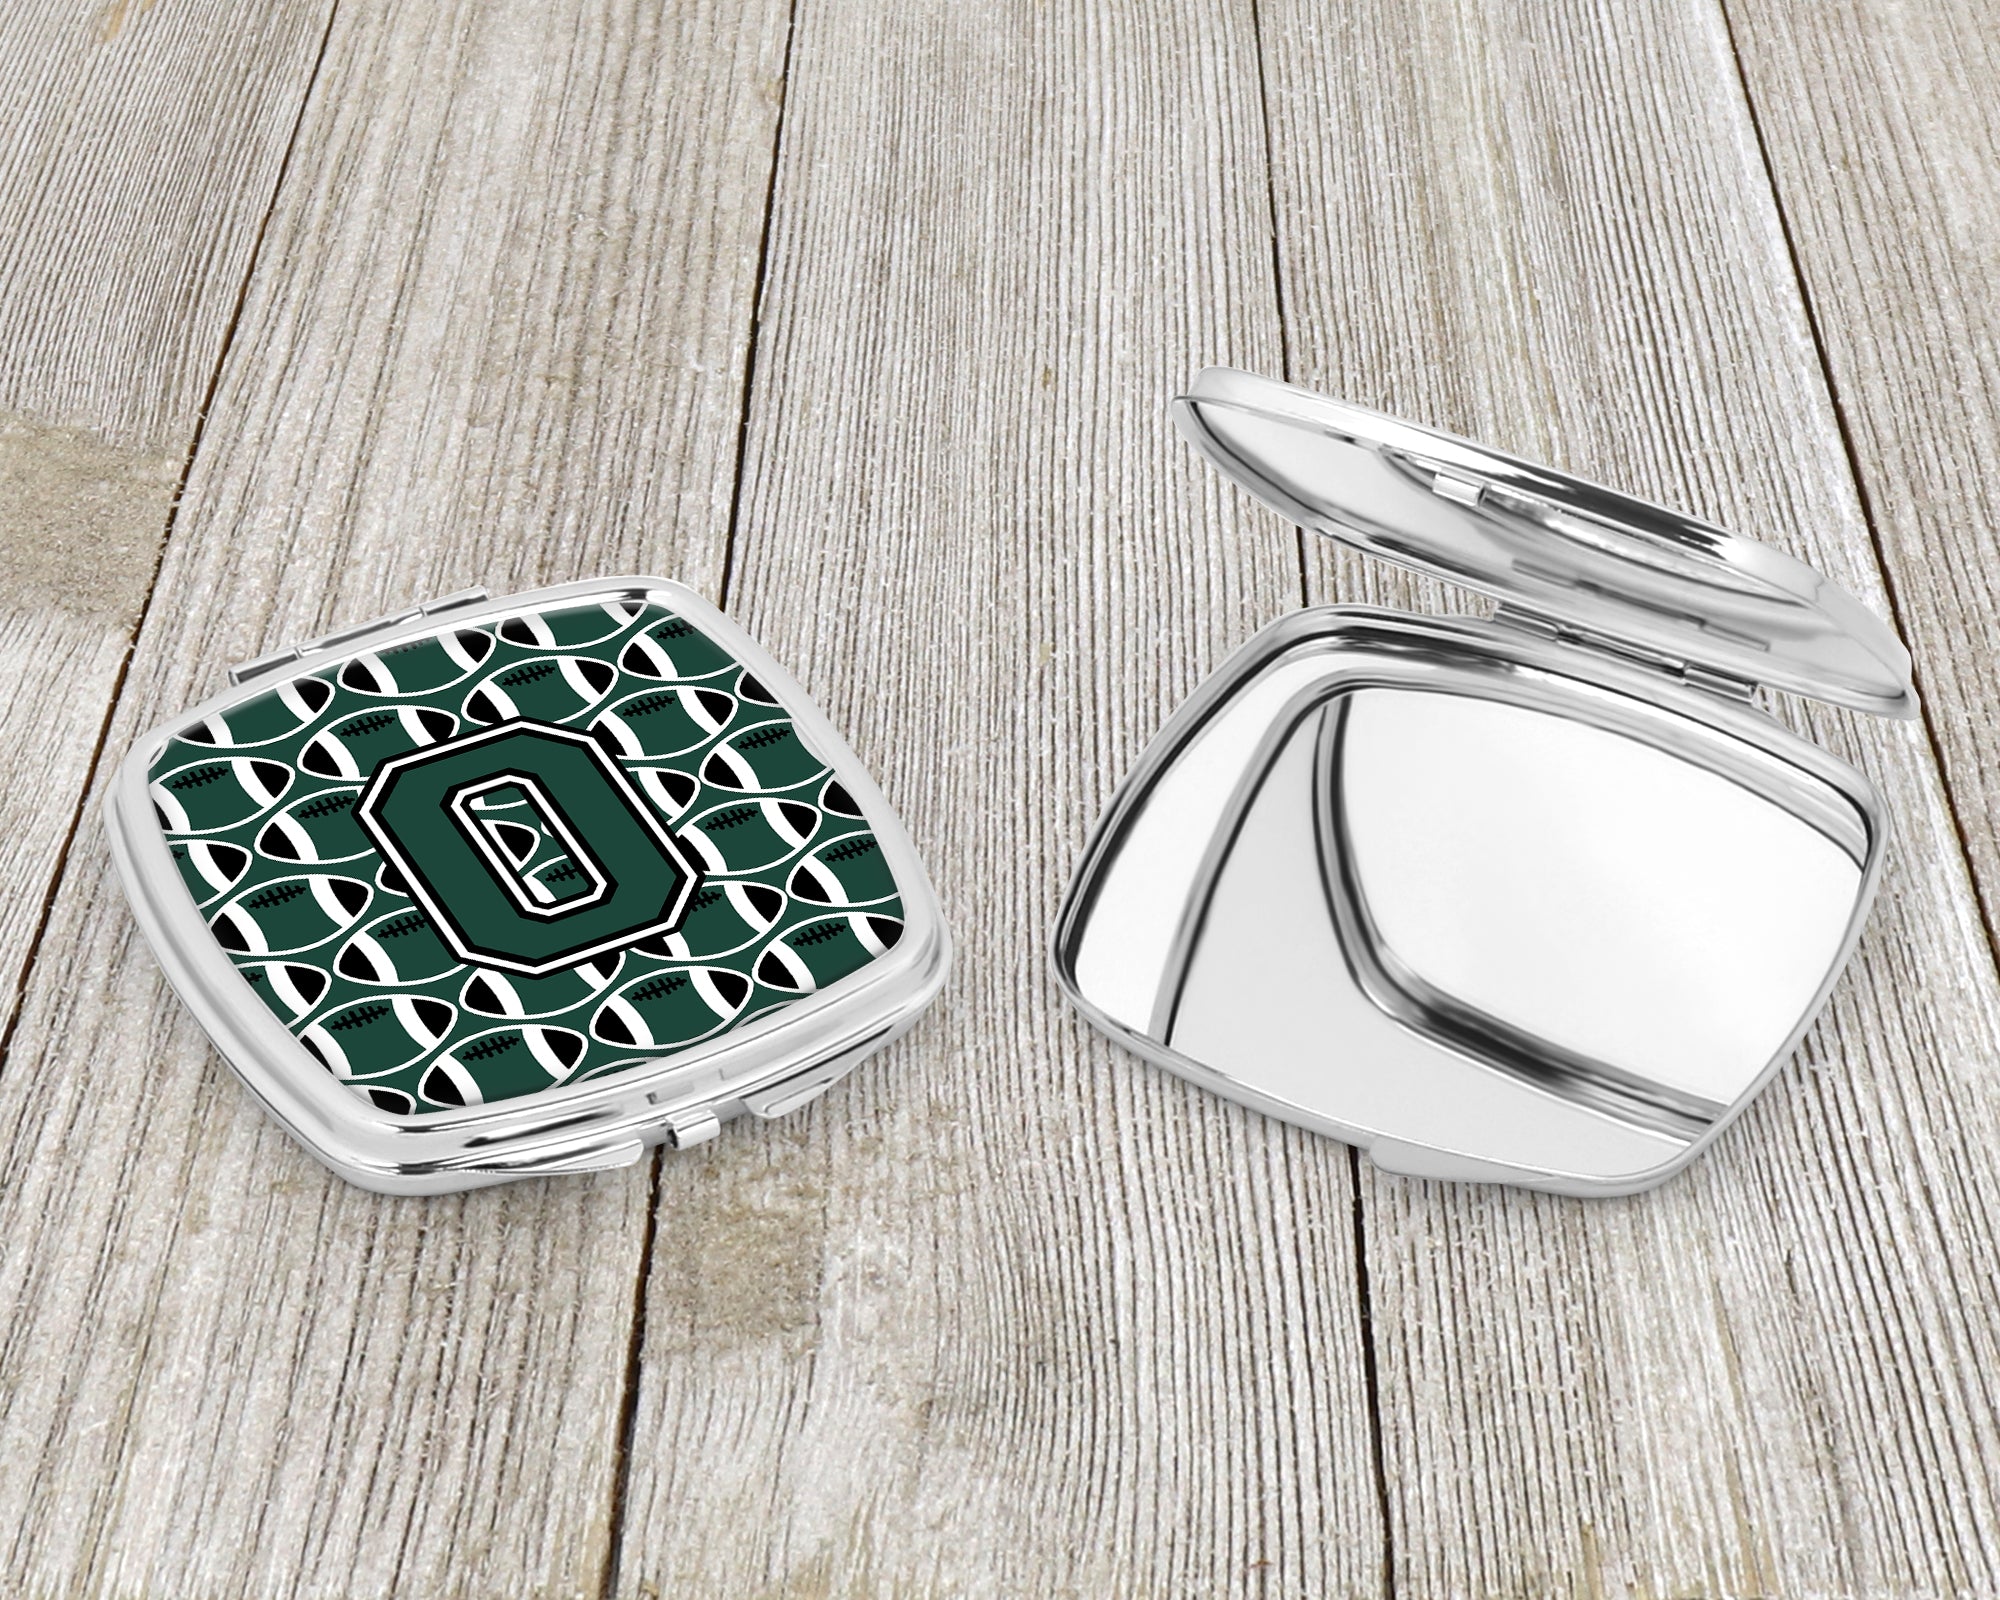 Letter O Football Green and White Compact Mirror CJ1071-OSCM  the-store.com.